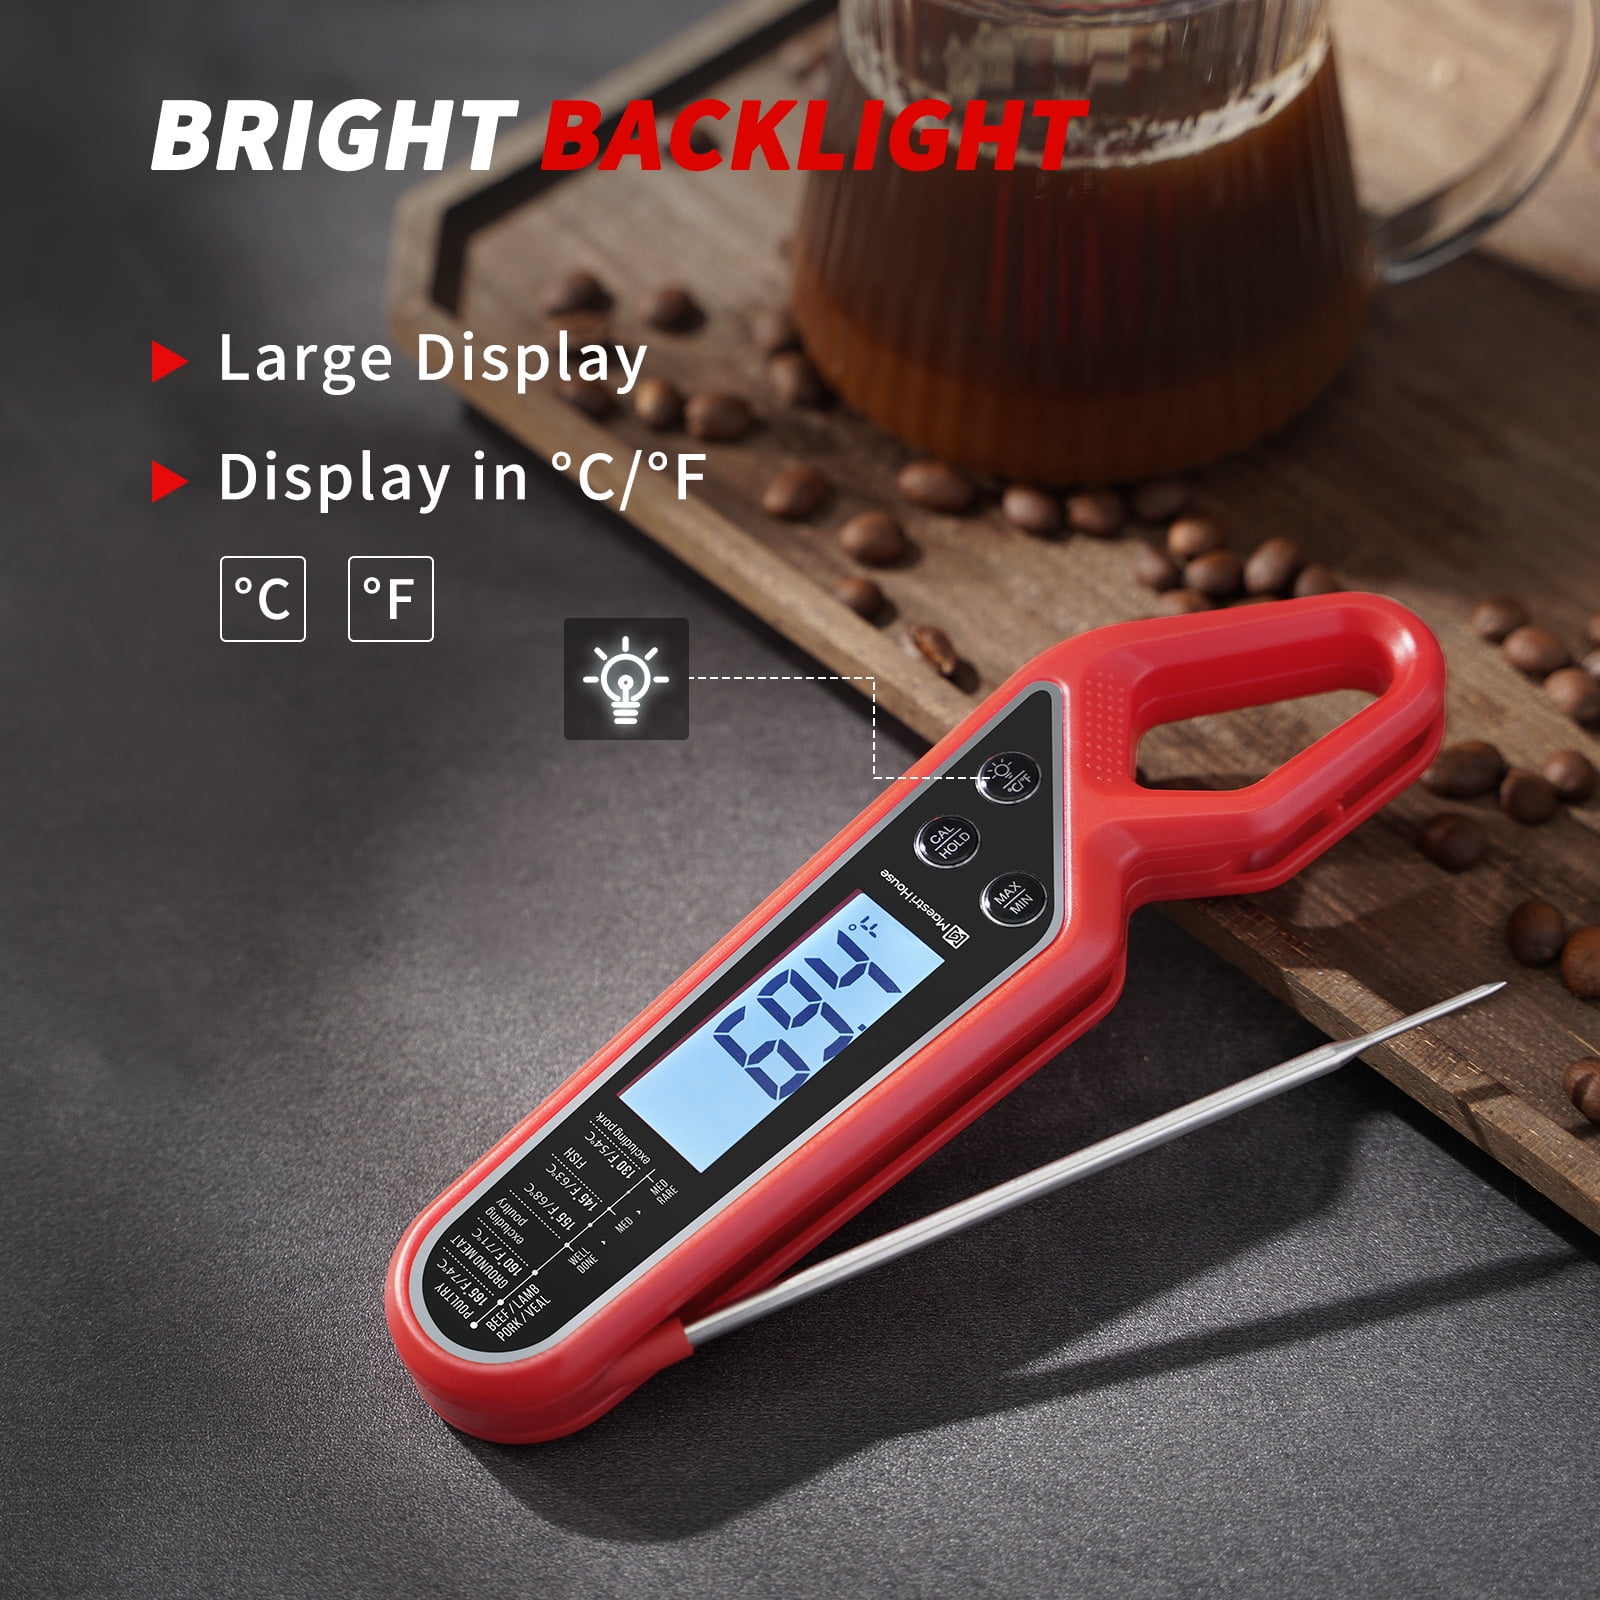 Fosmon Instant Read Digital Cooking Food Thermometer with Stainless Steel Probe and LCD Screen for Kitchen, Meat, Grill 51022